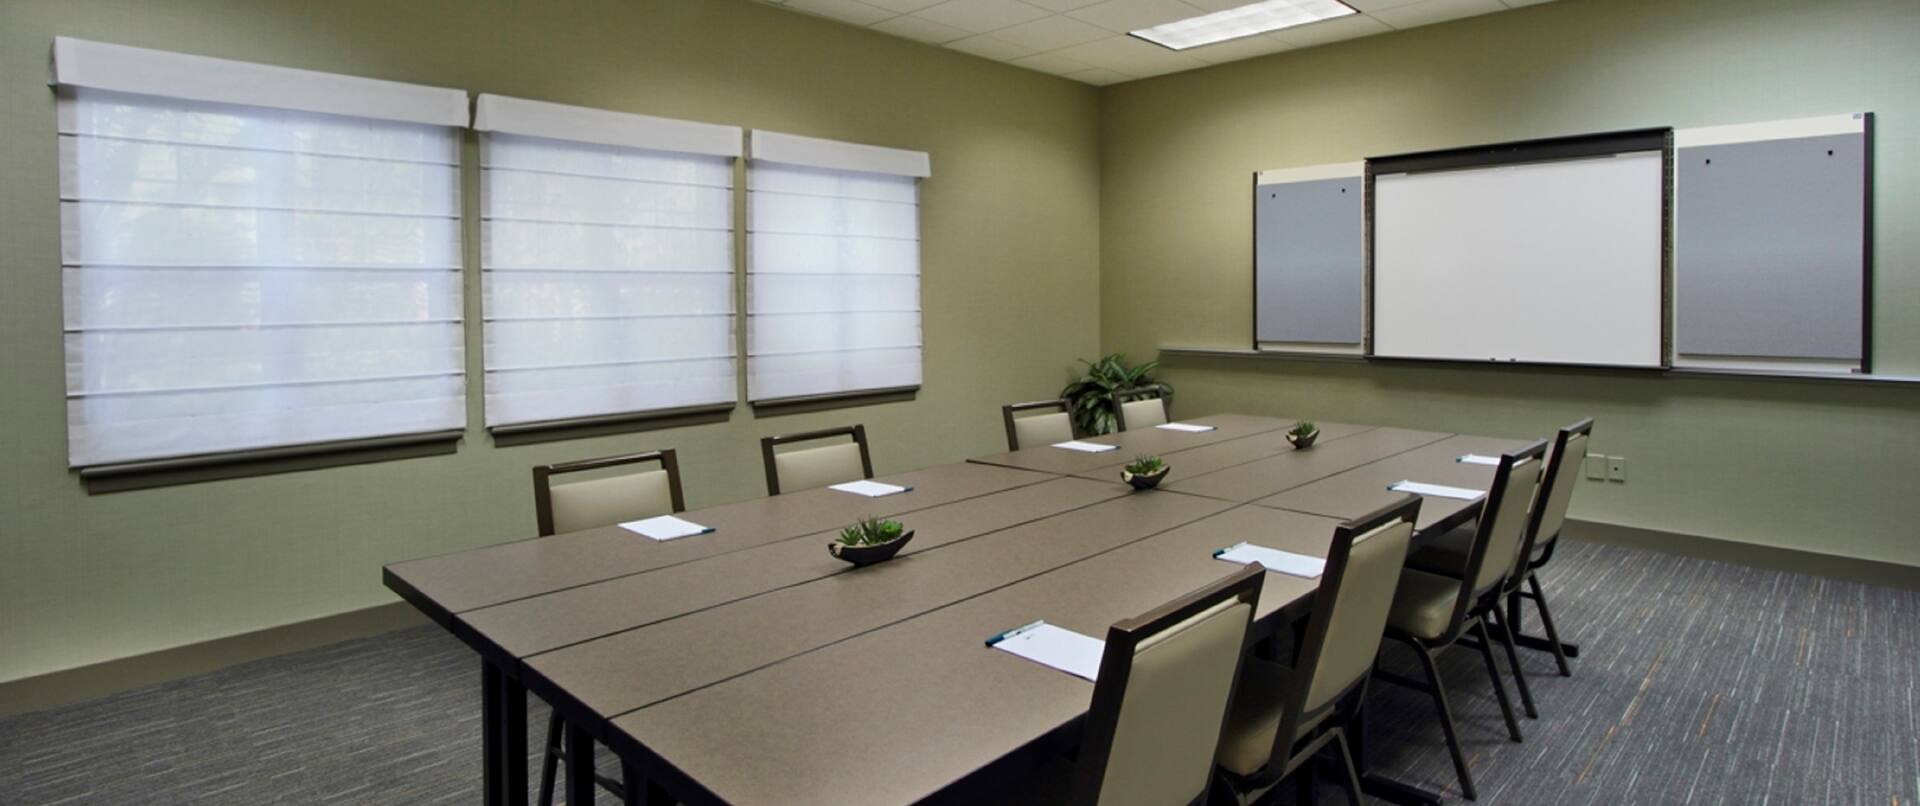 Cypress Room in Boardroom Setup With Seating for 8 Facing Whiteboard